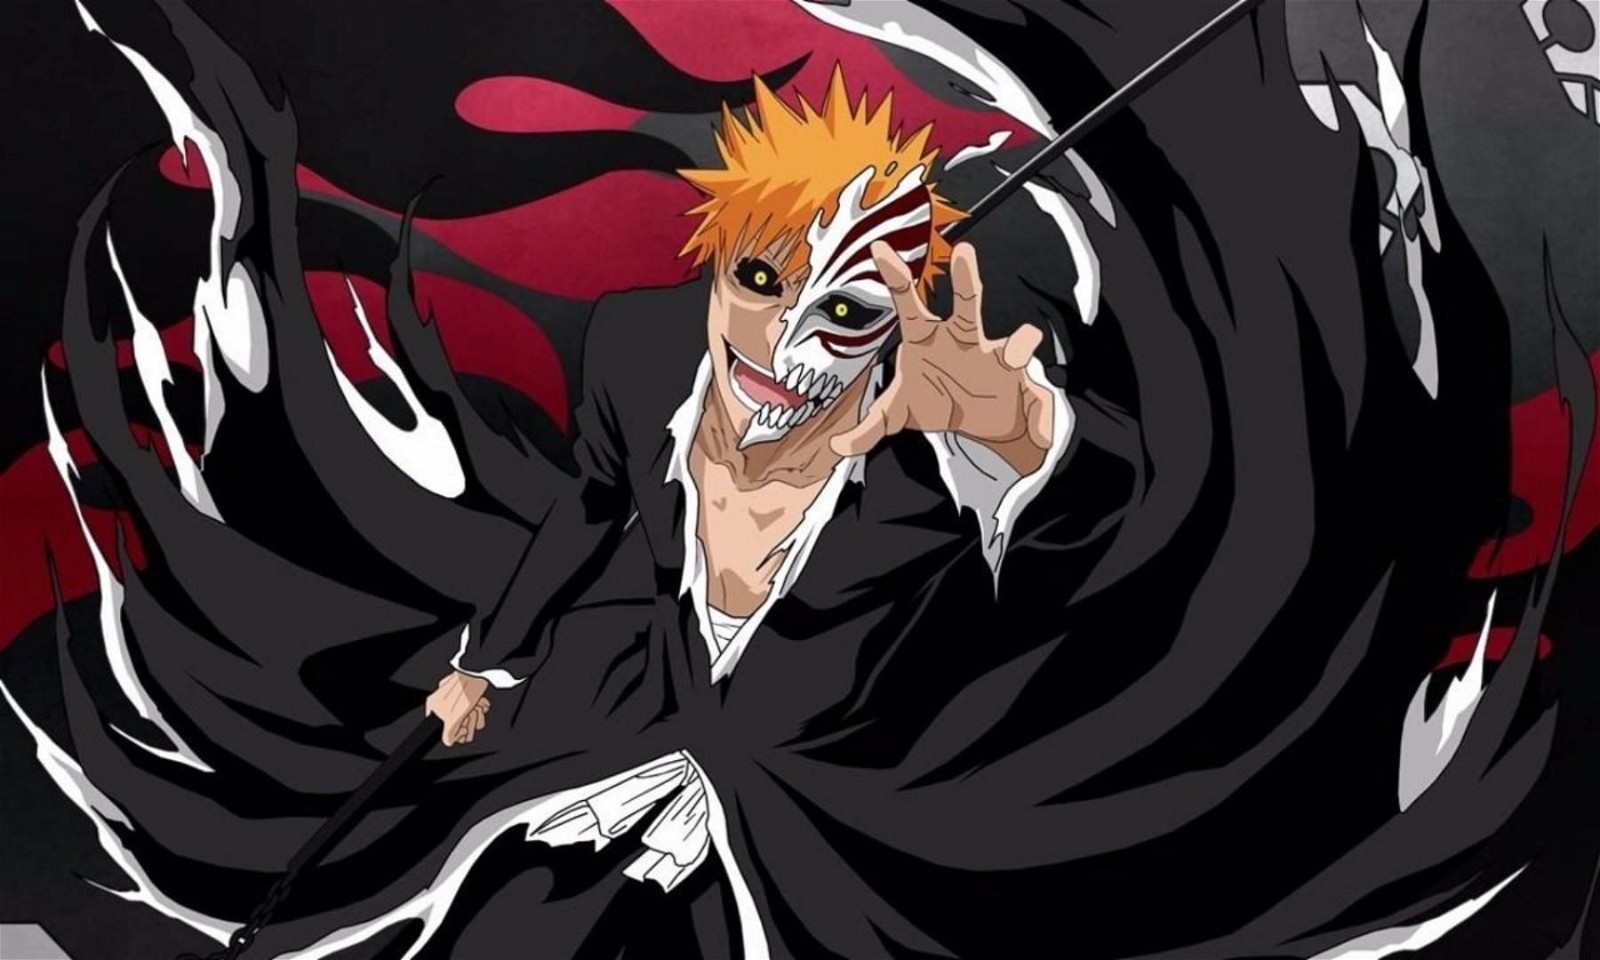 Bleach Thousand Year Blood War Episode 25: Who shall be 'The